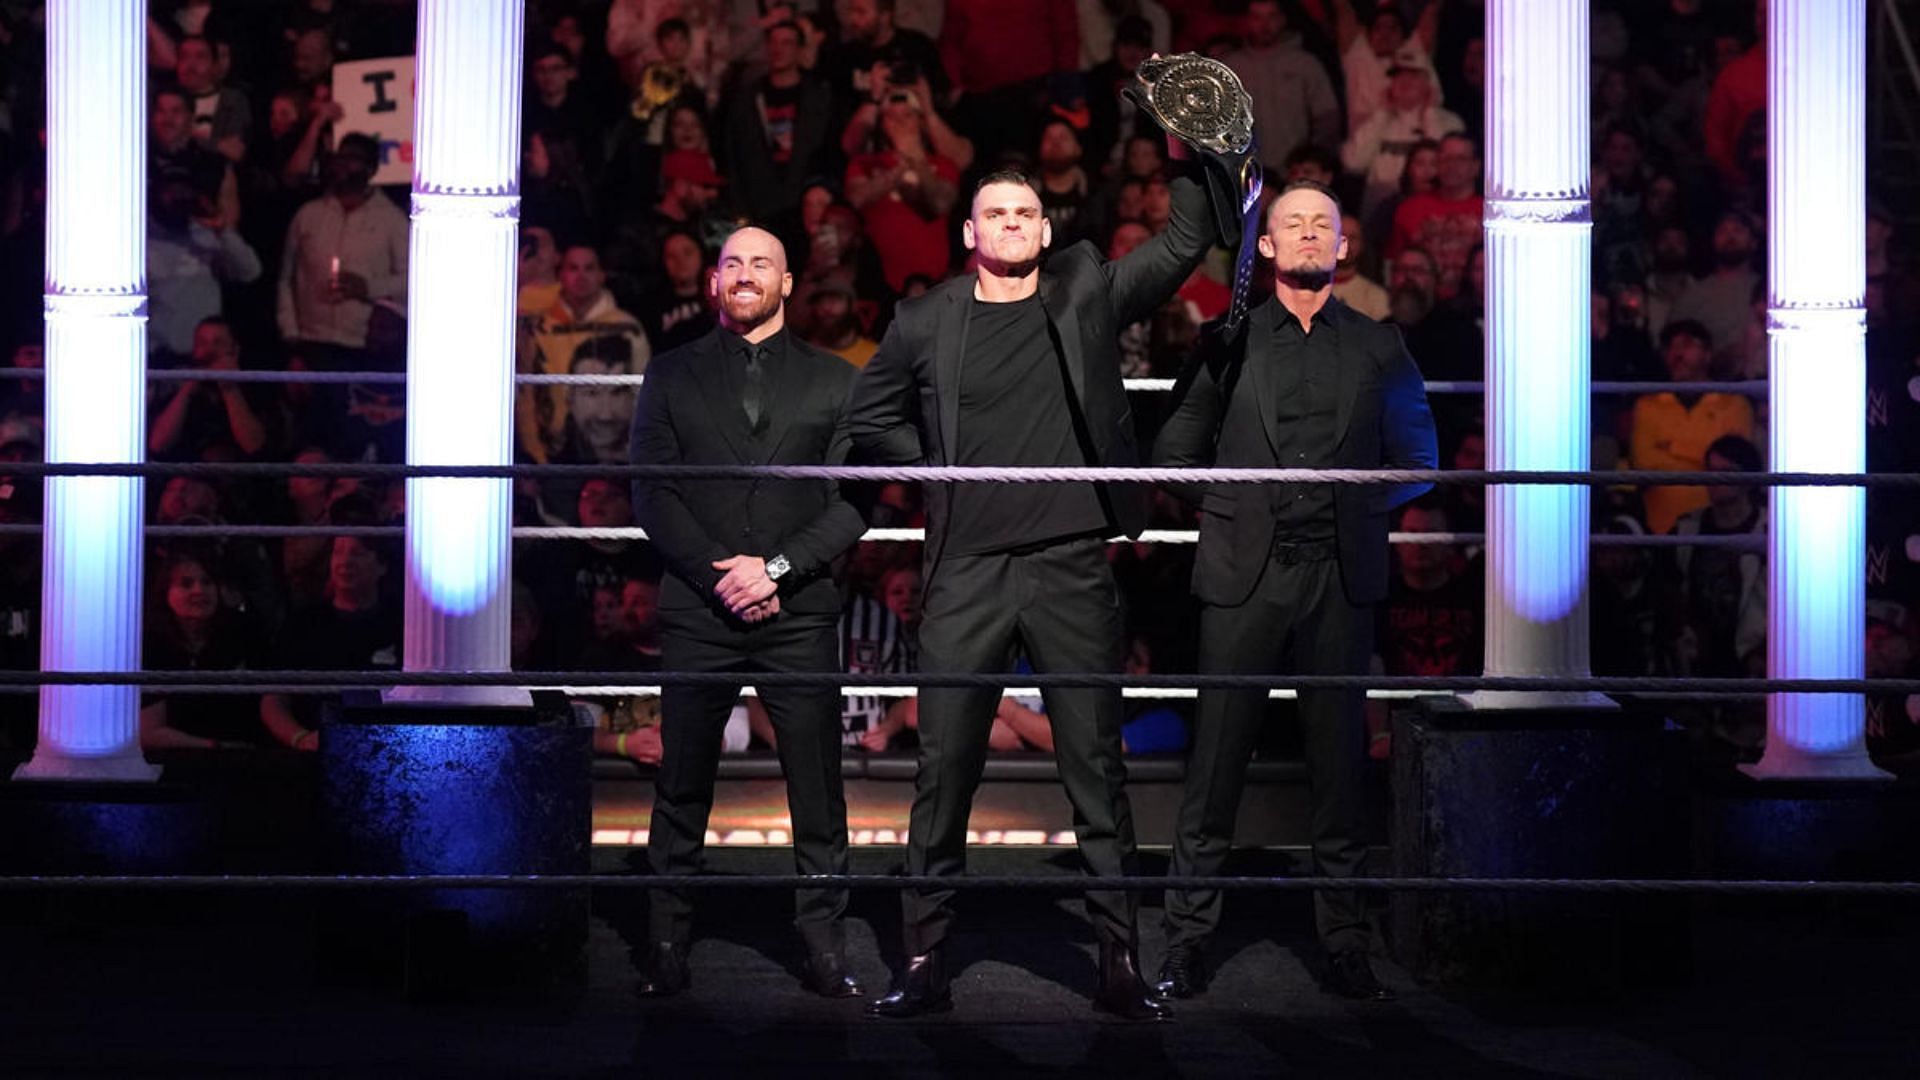 Imperium is one of the strongest factions in WWE